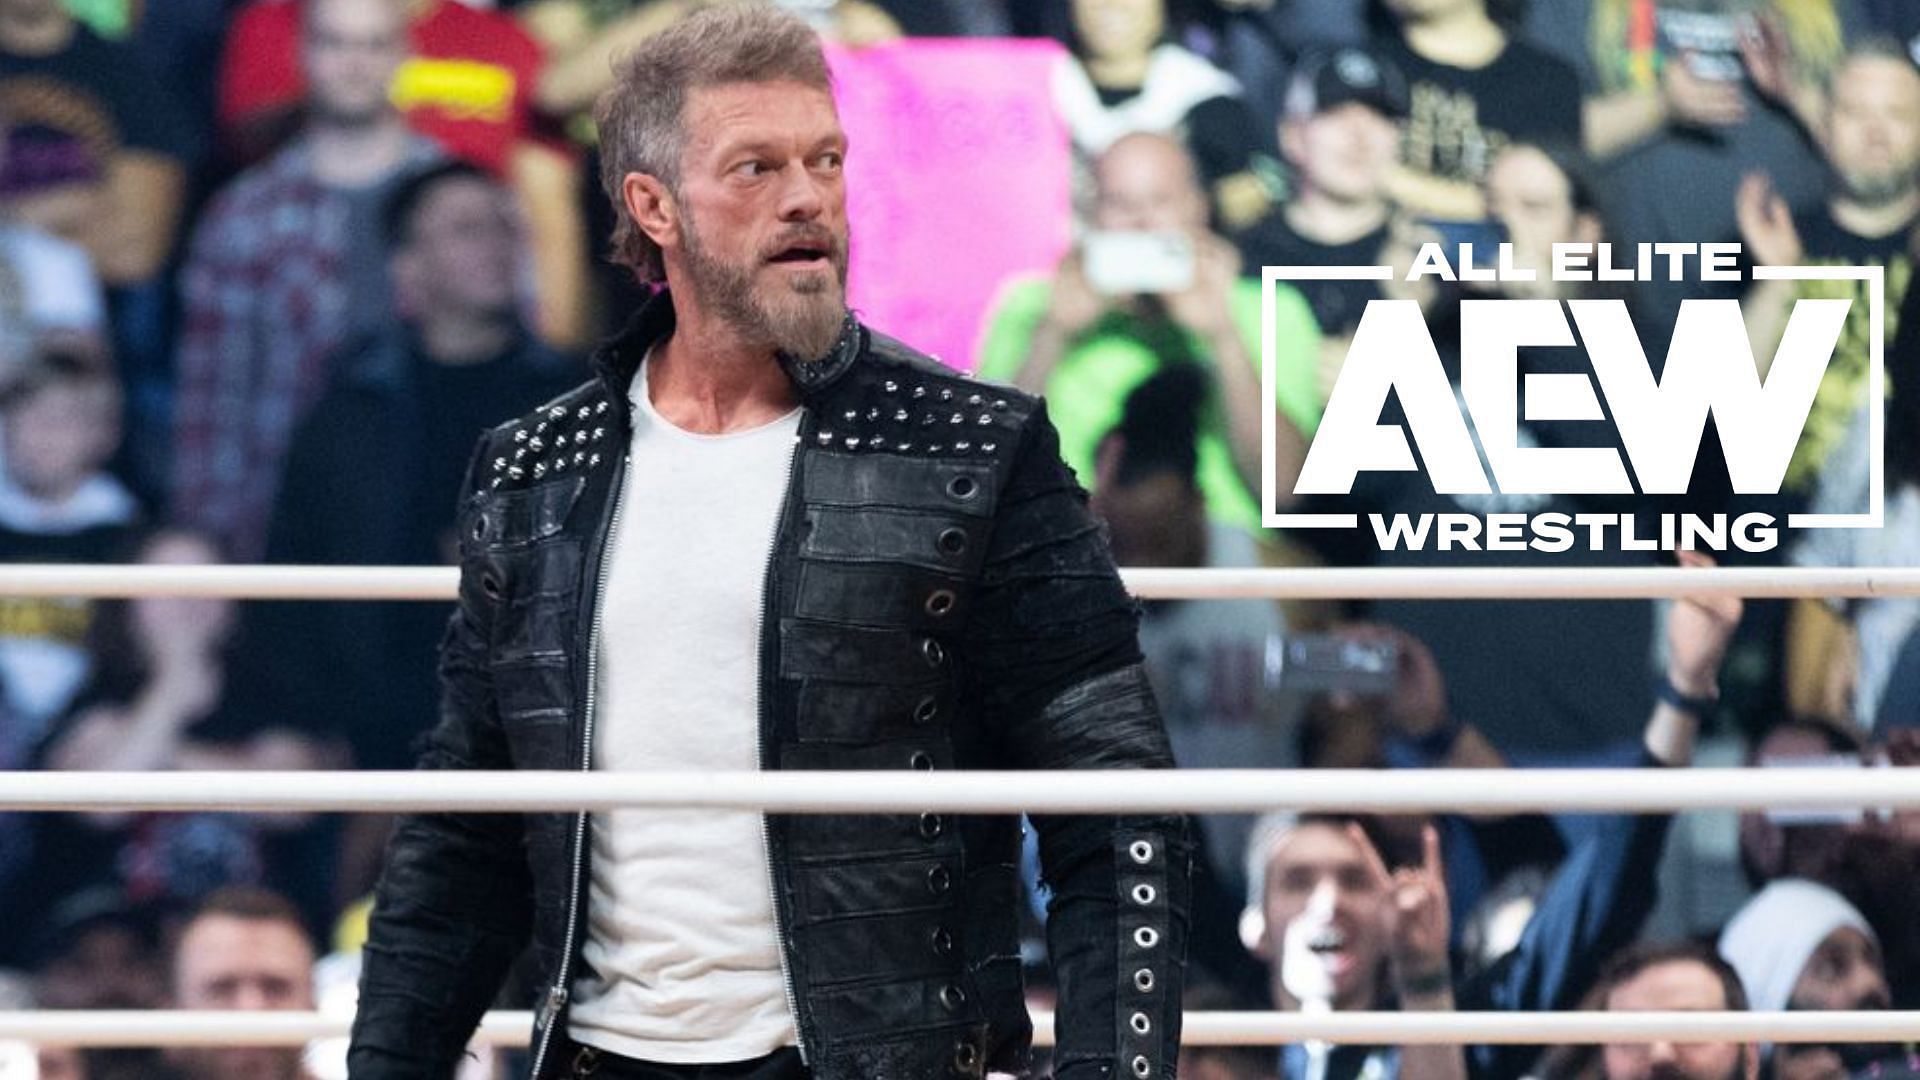 Adam Copeland (fka Edge) files for several trademarks after joining AEW